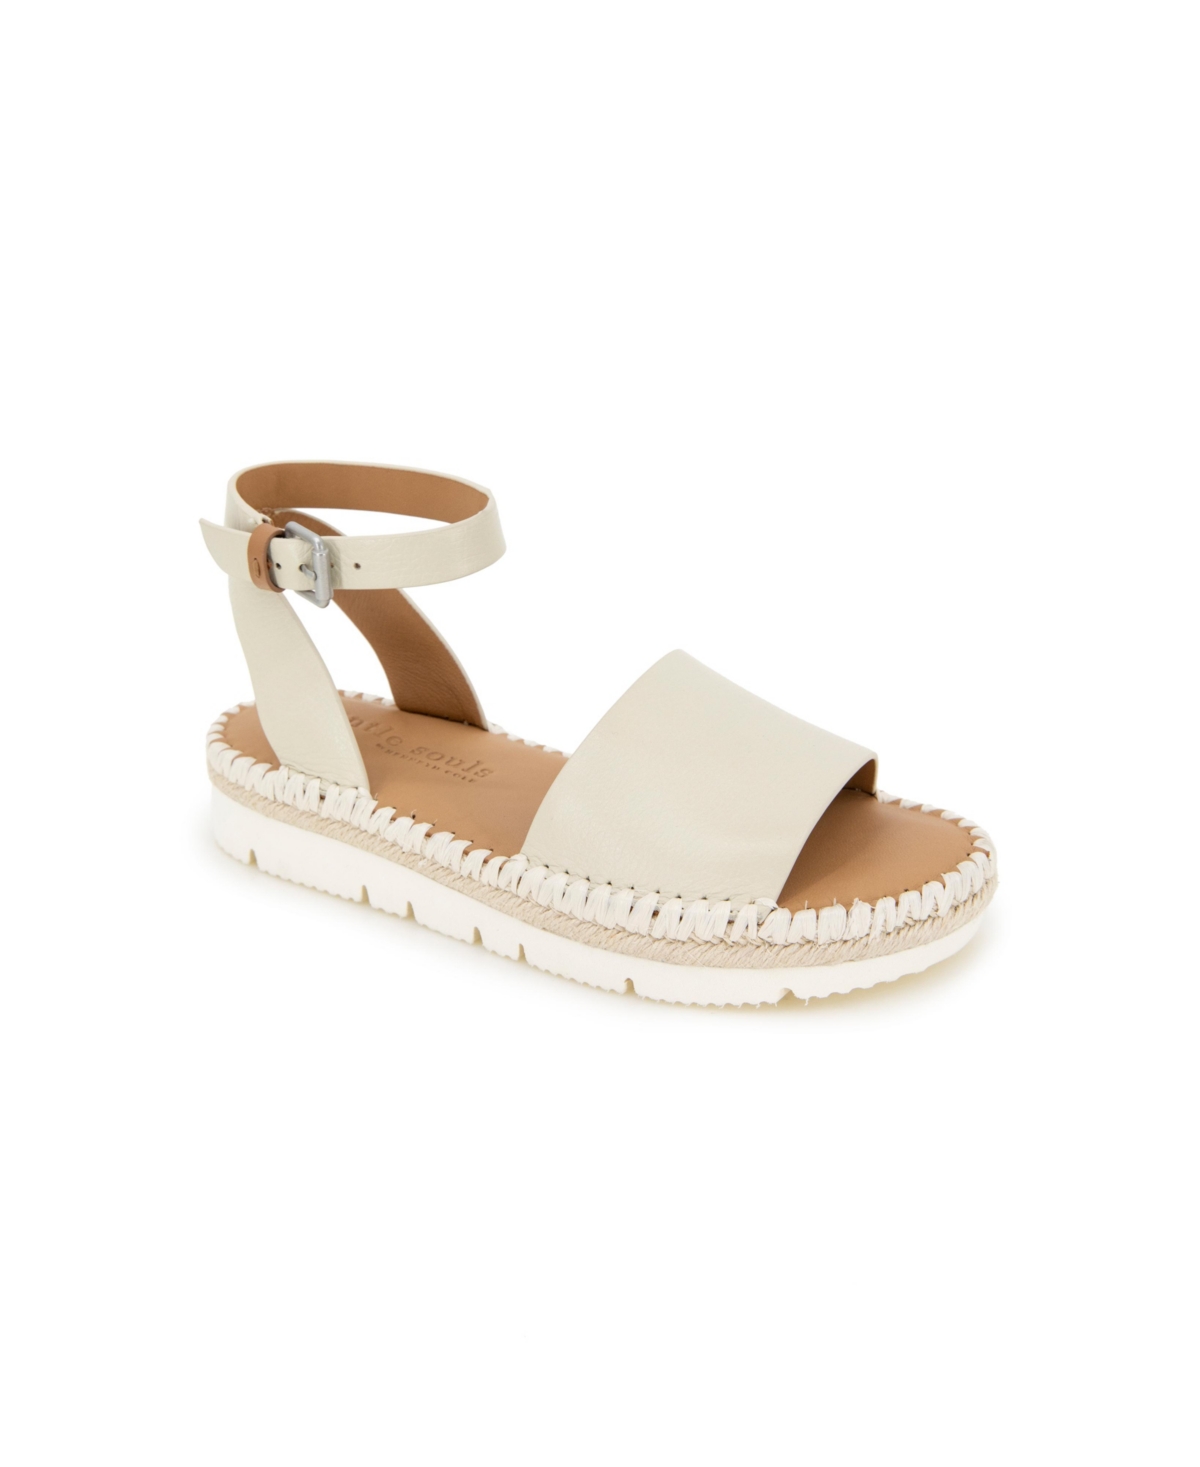 Women's Lucille Buckle Sandal - Luggage Leather